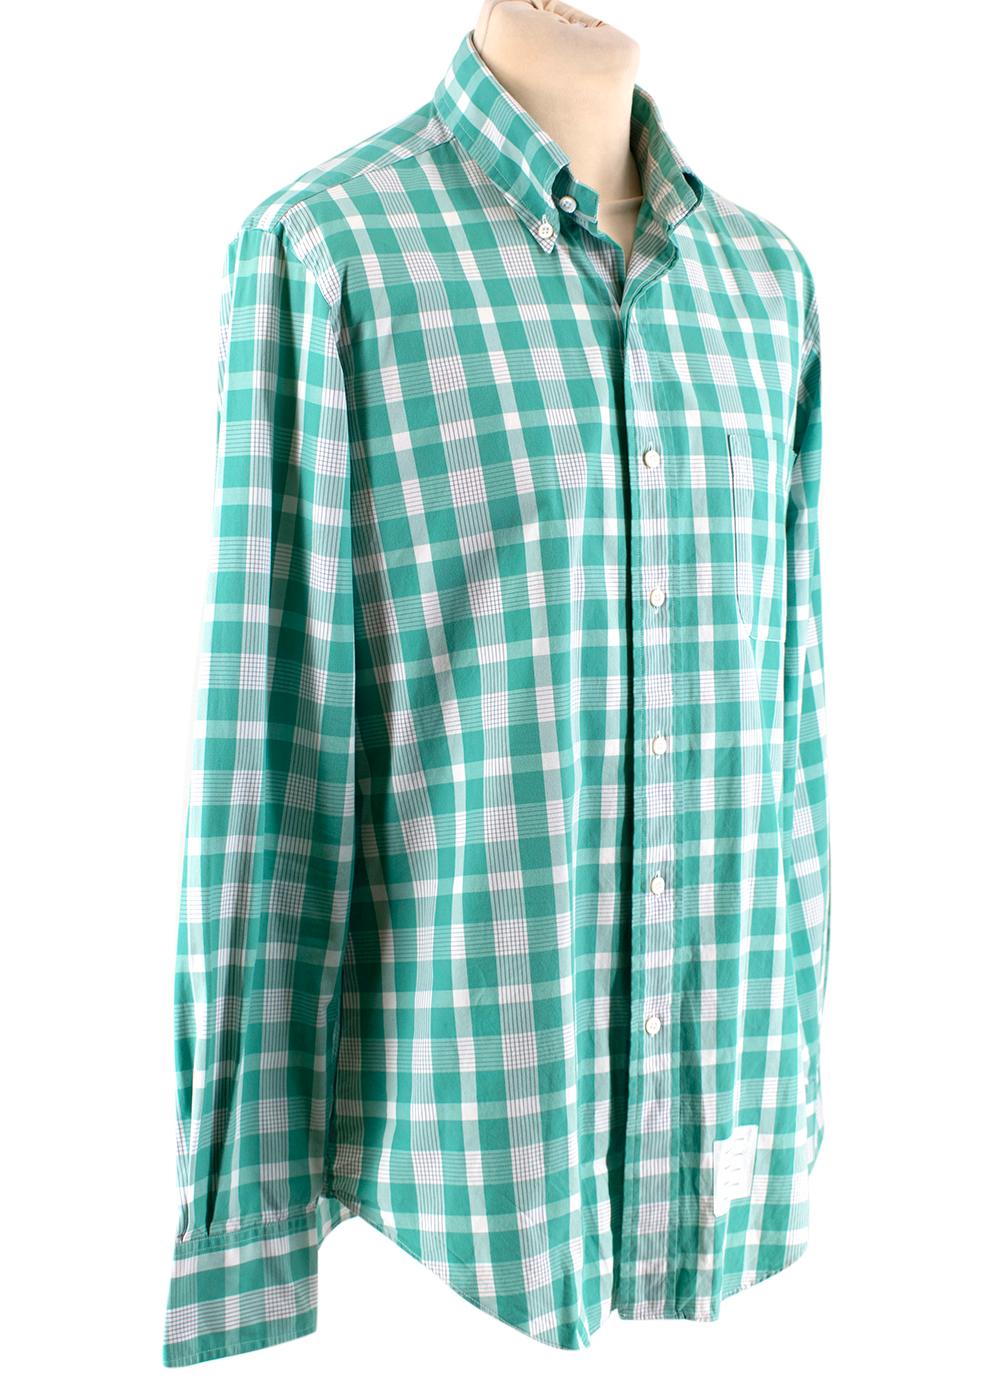 Thom Browne Green & White Checked Cotton Shirt
-Soft cotton material
-Gorgeous green colour
-Single left chest pocket
-Long sleeve button cuffs
-Point collar
-Buttons all the way up
-Thom Brown 4-line tag
-Center-back locker loop

Materials: 100%